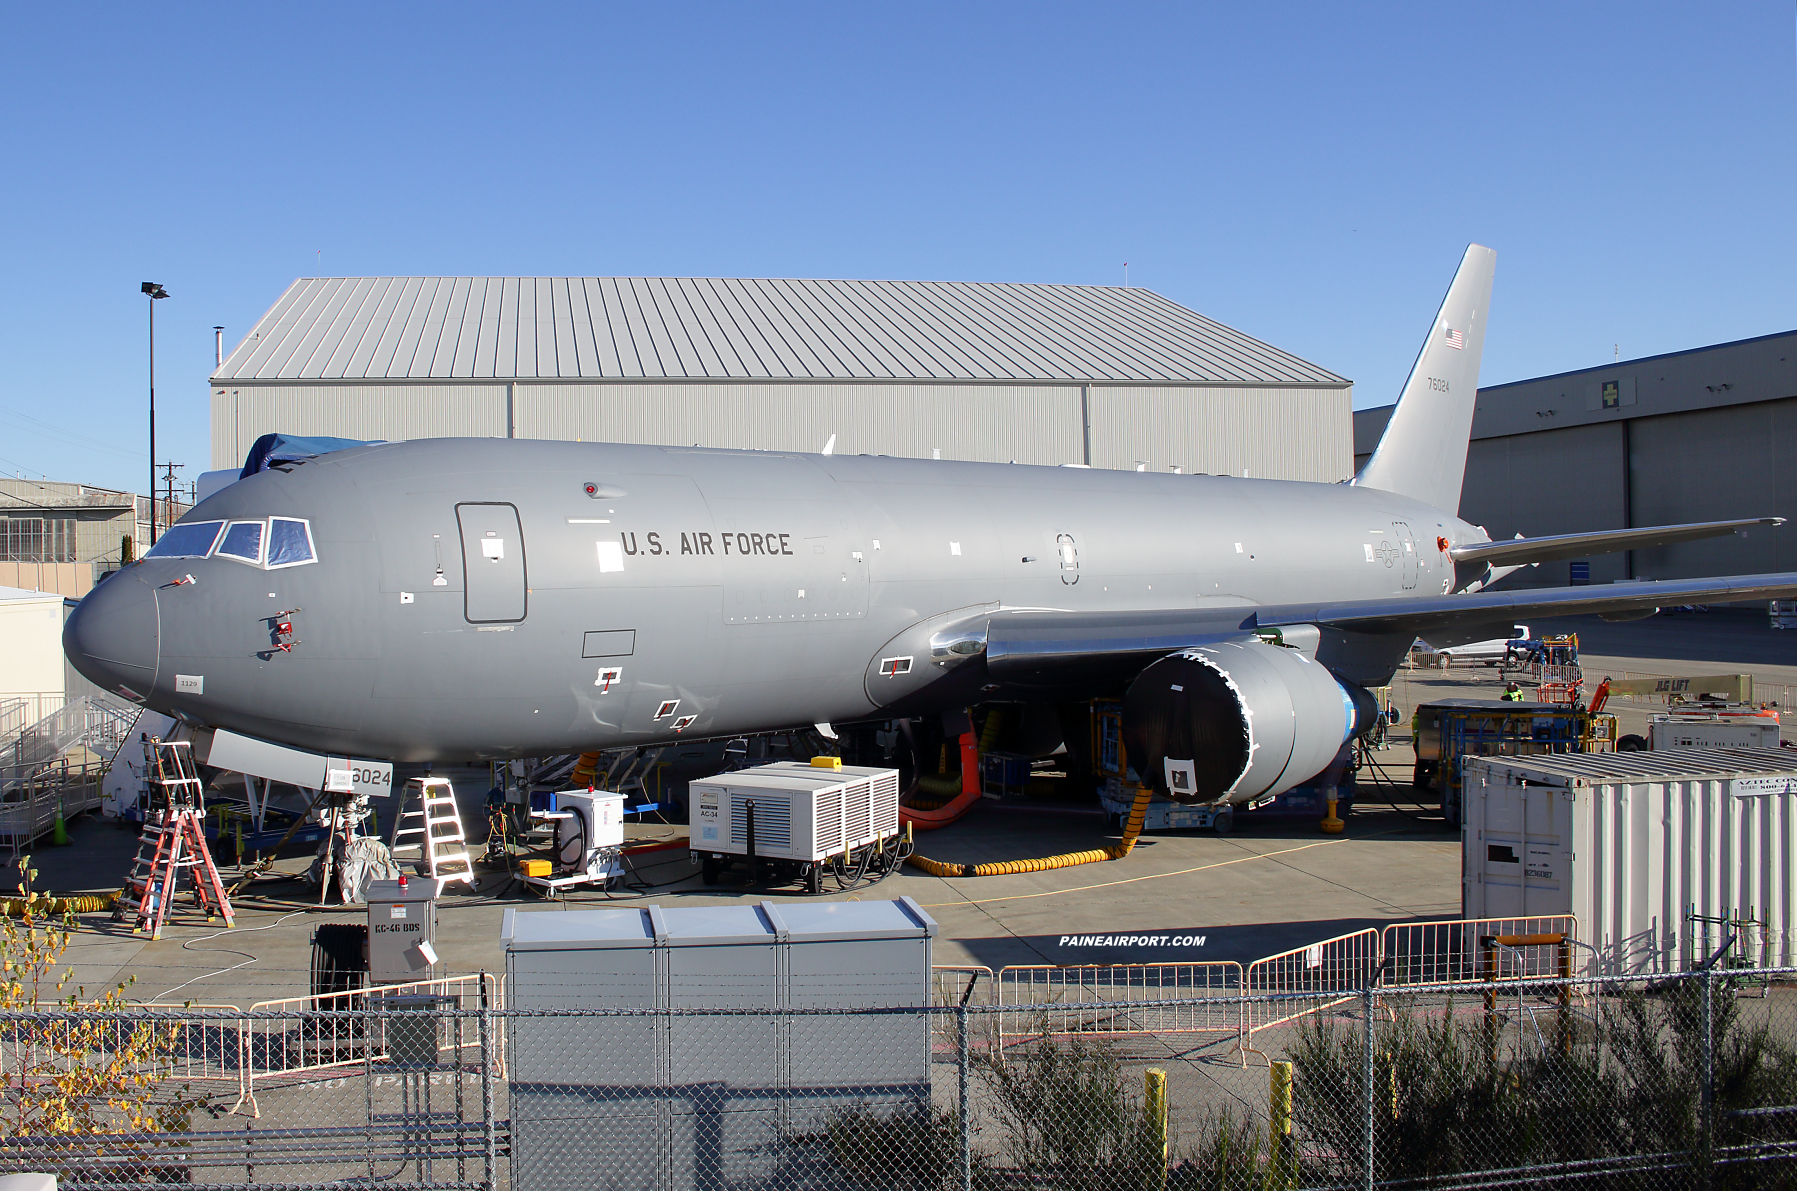 KC-46A 17-46024 at Paine Field